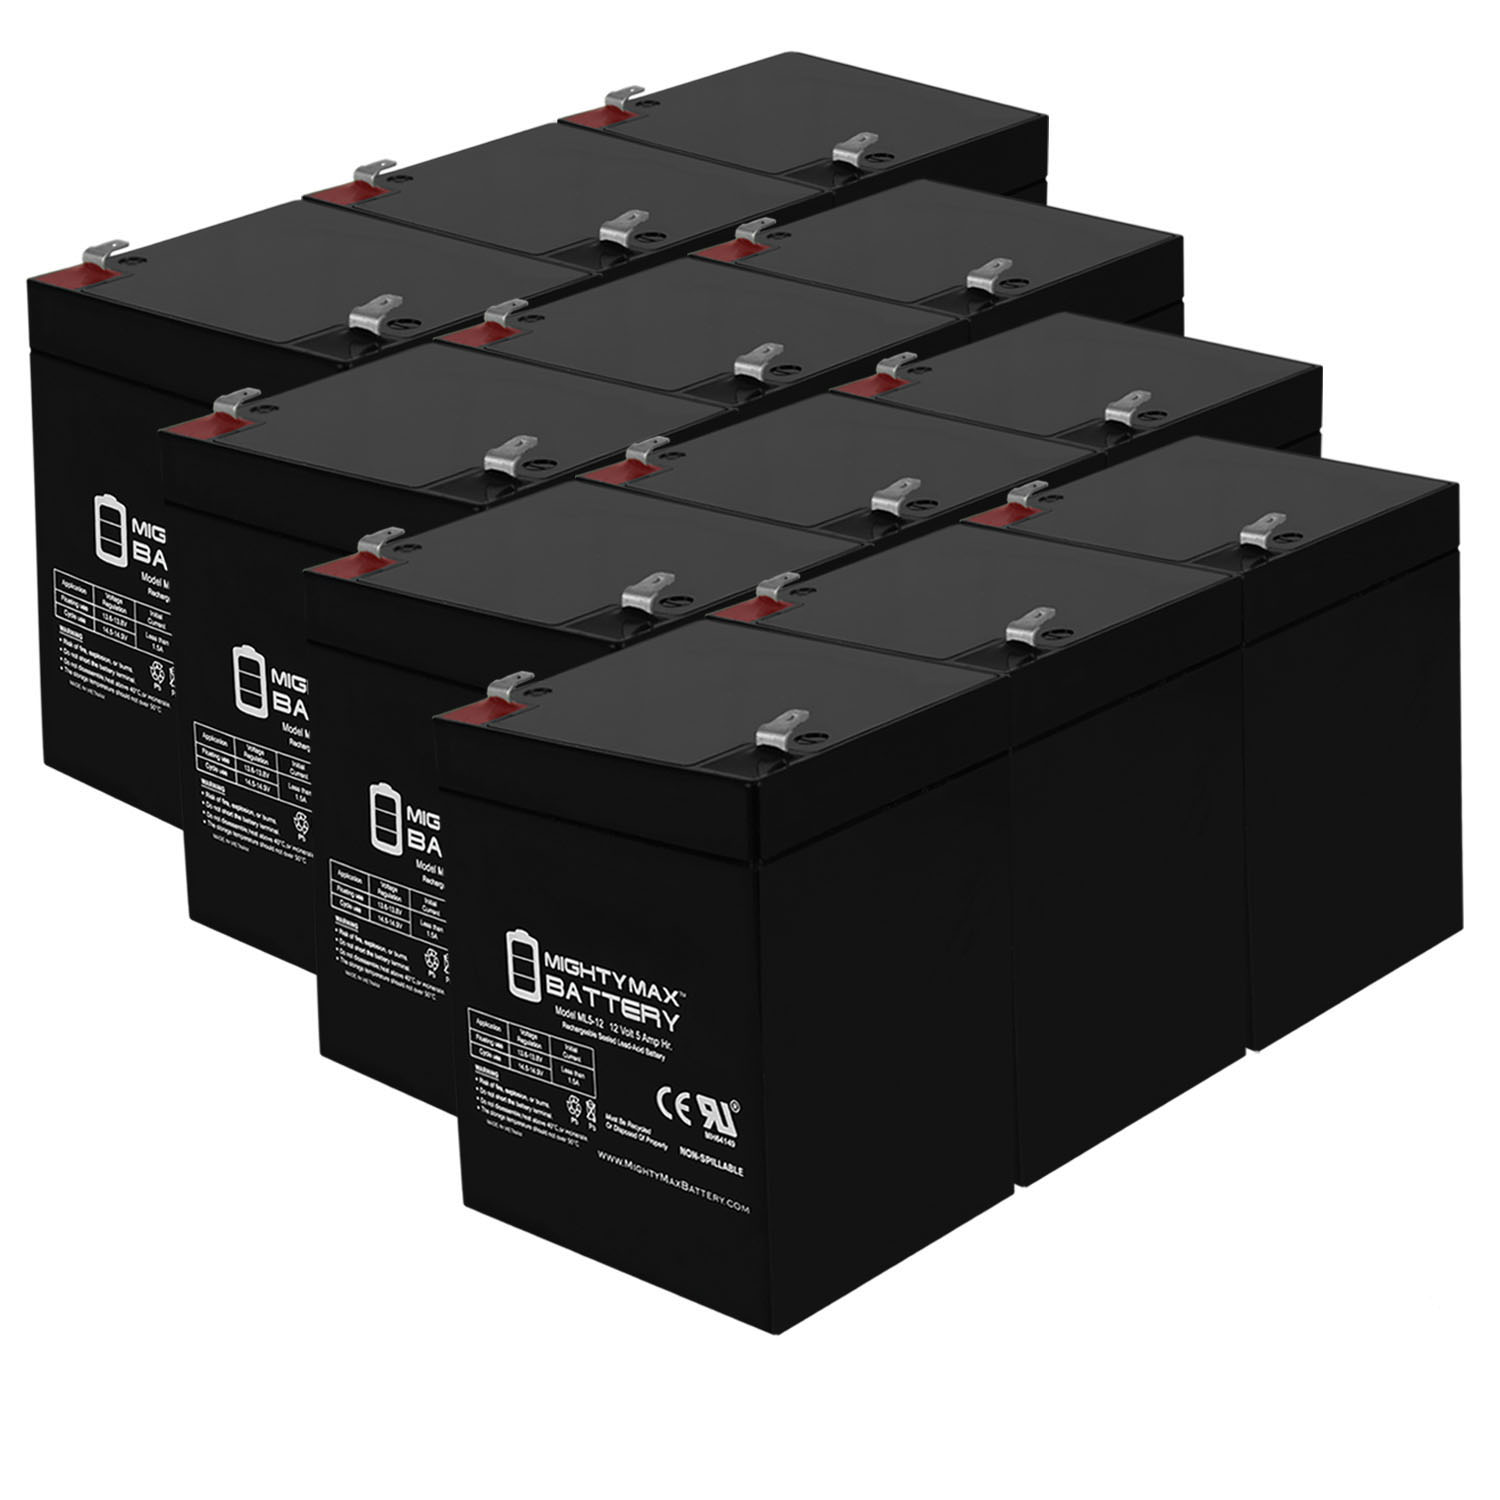 12V 5AH SLA Replacement Battery for Unipower WP5612 - 12 Pack